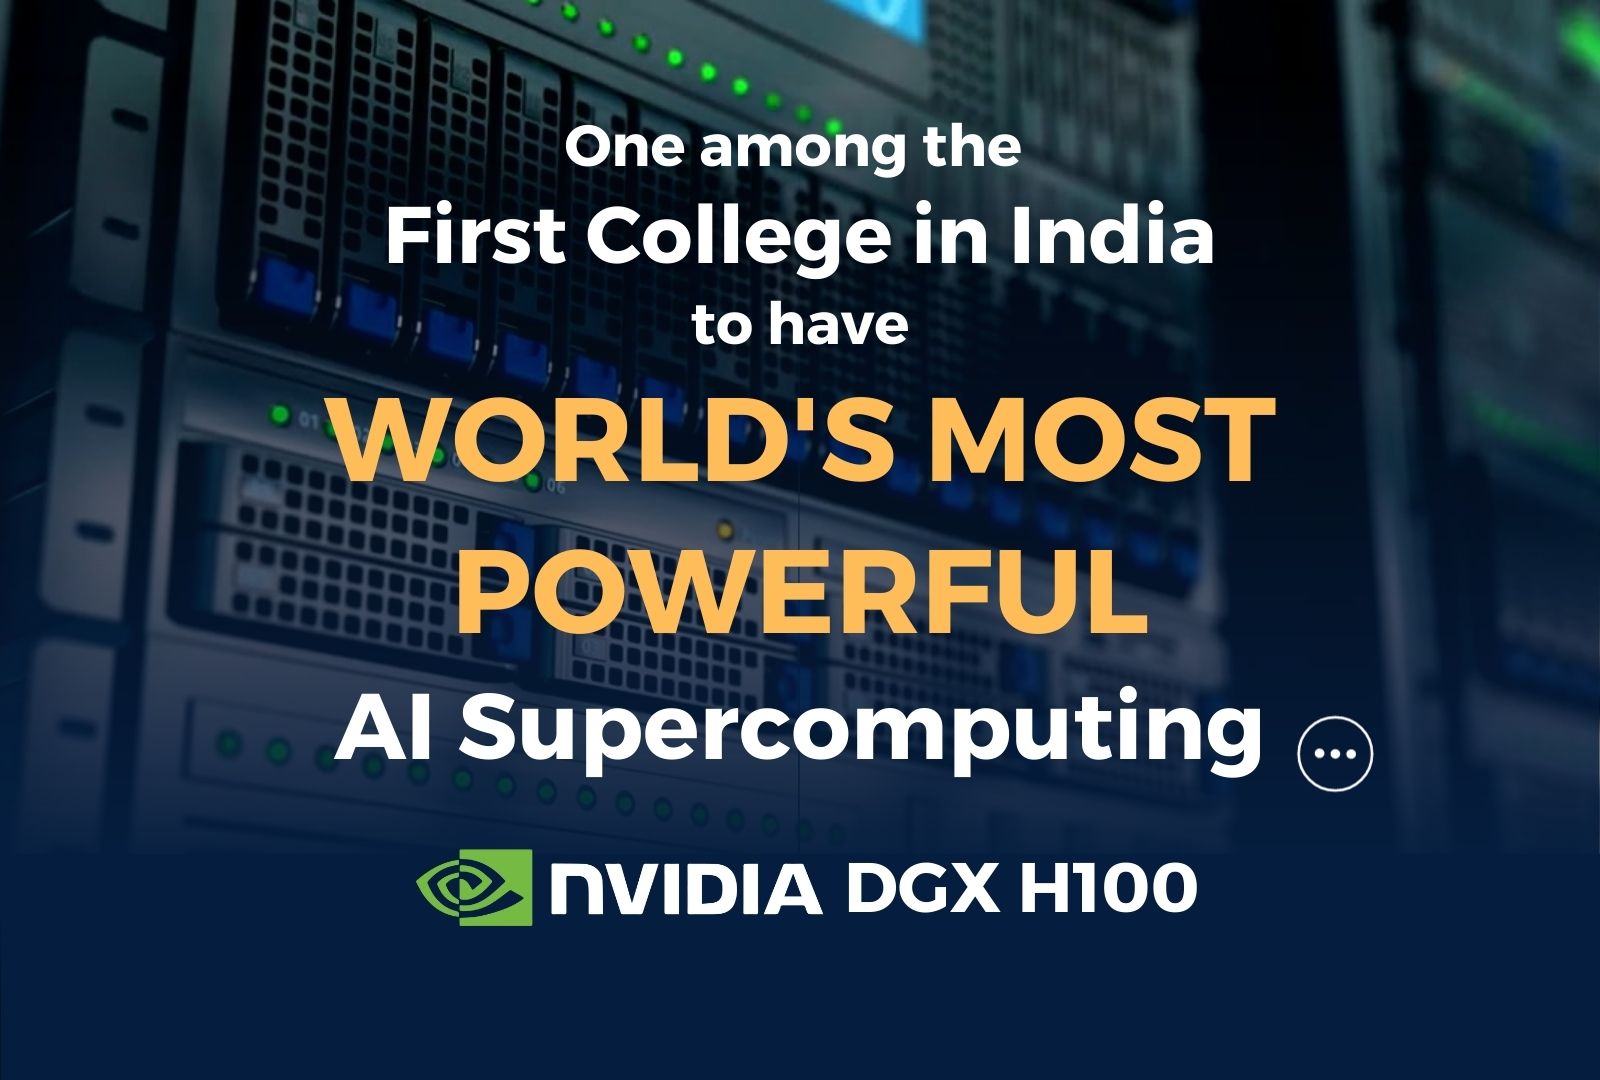 Embracing the Future: Our Journey with NVIDIA’s DGX H100 and the Proliferation of AI Learning